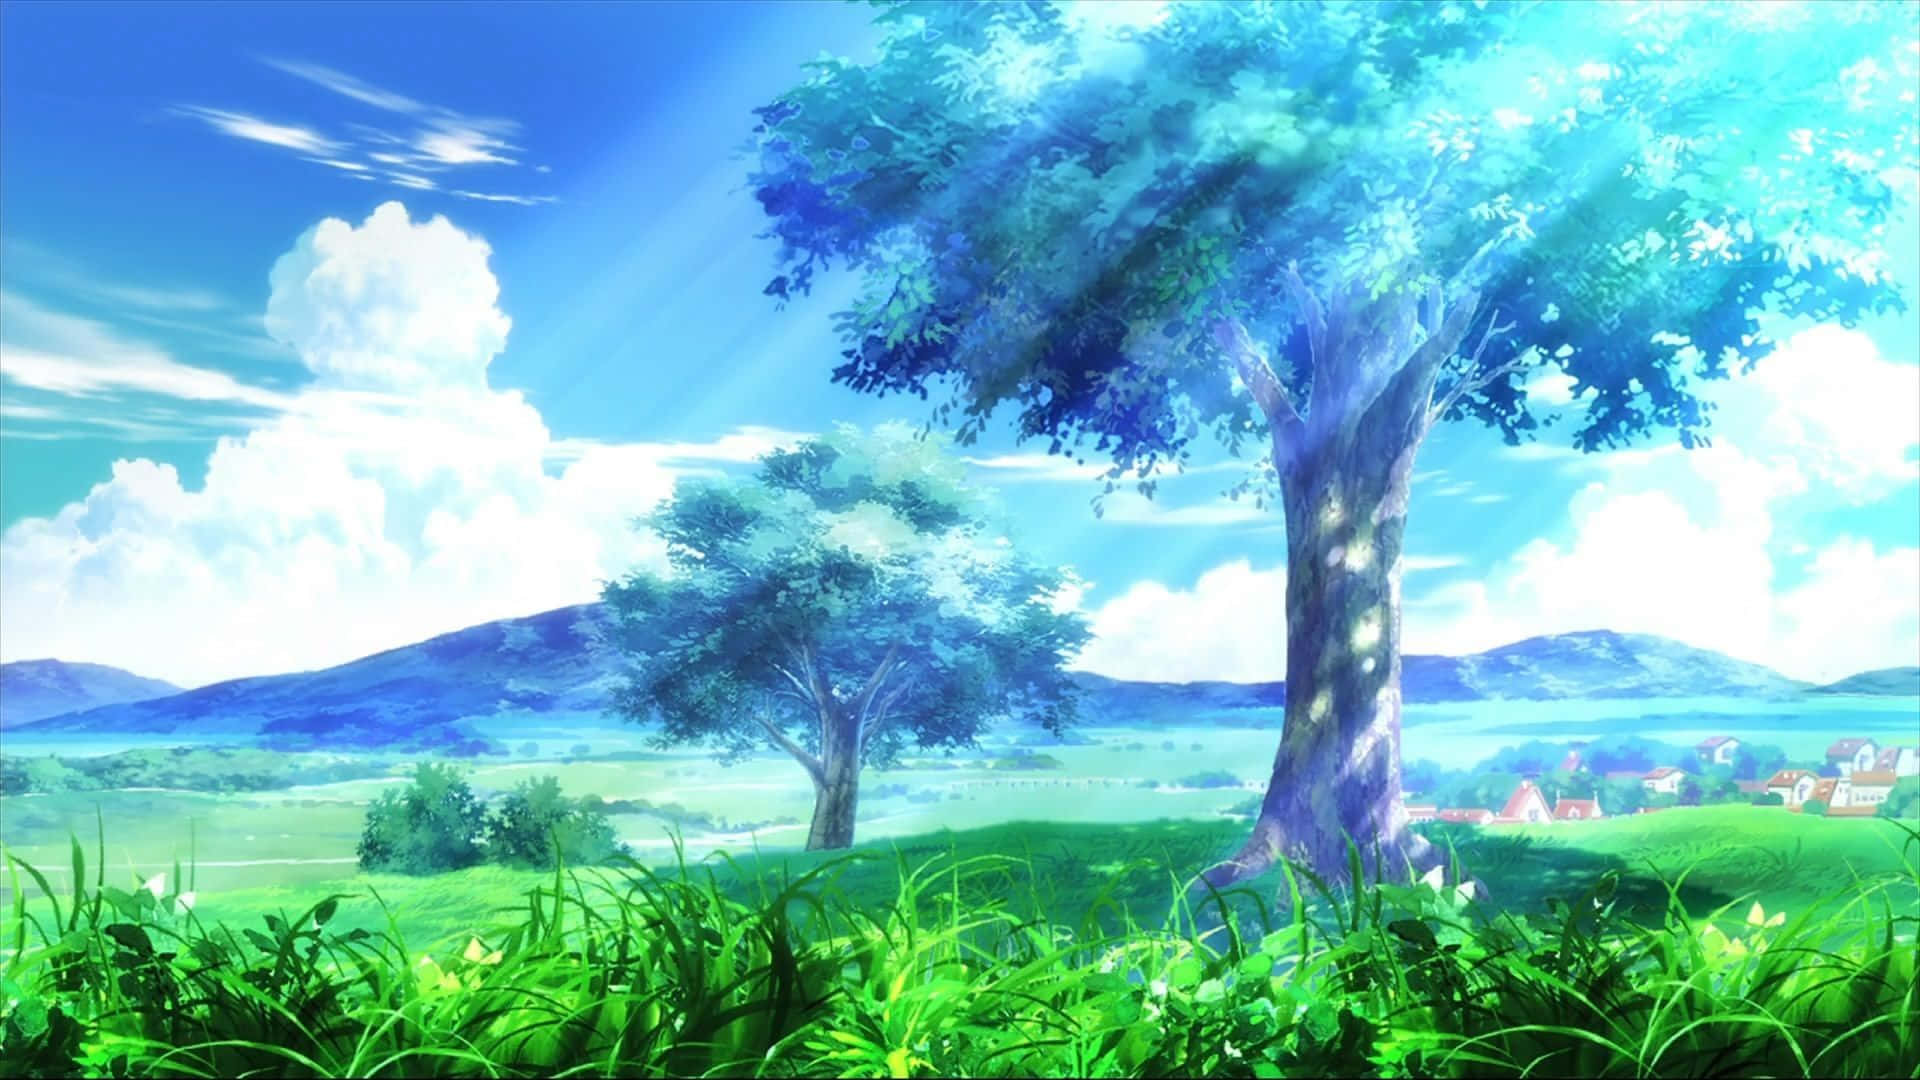 “a Moment Of Calm - Cute Anime Scenery”